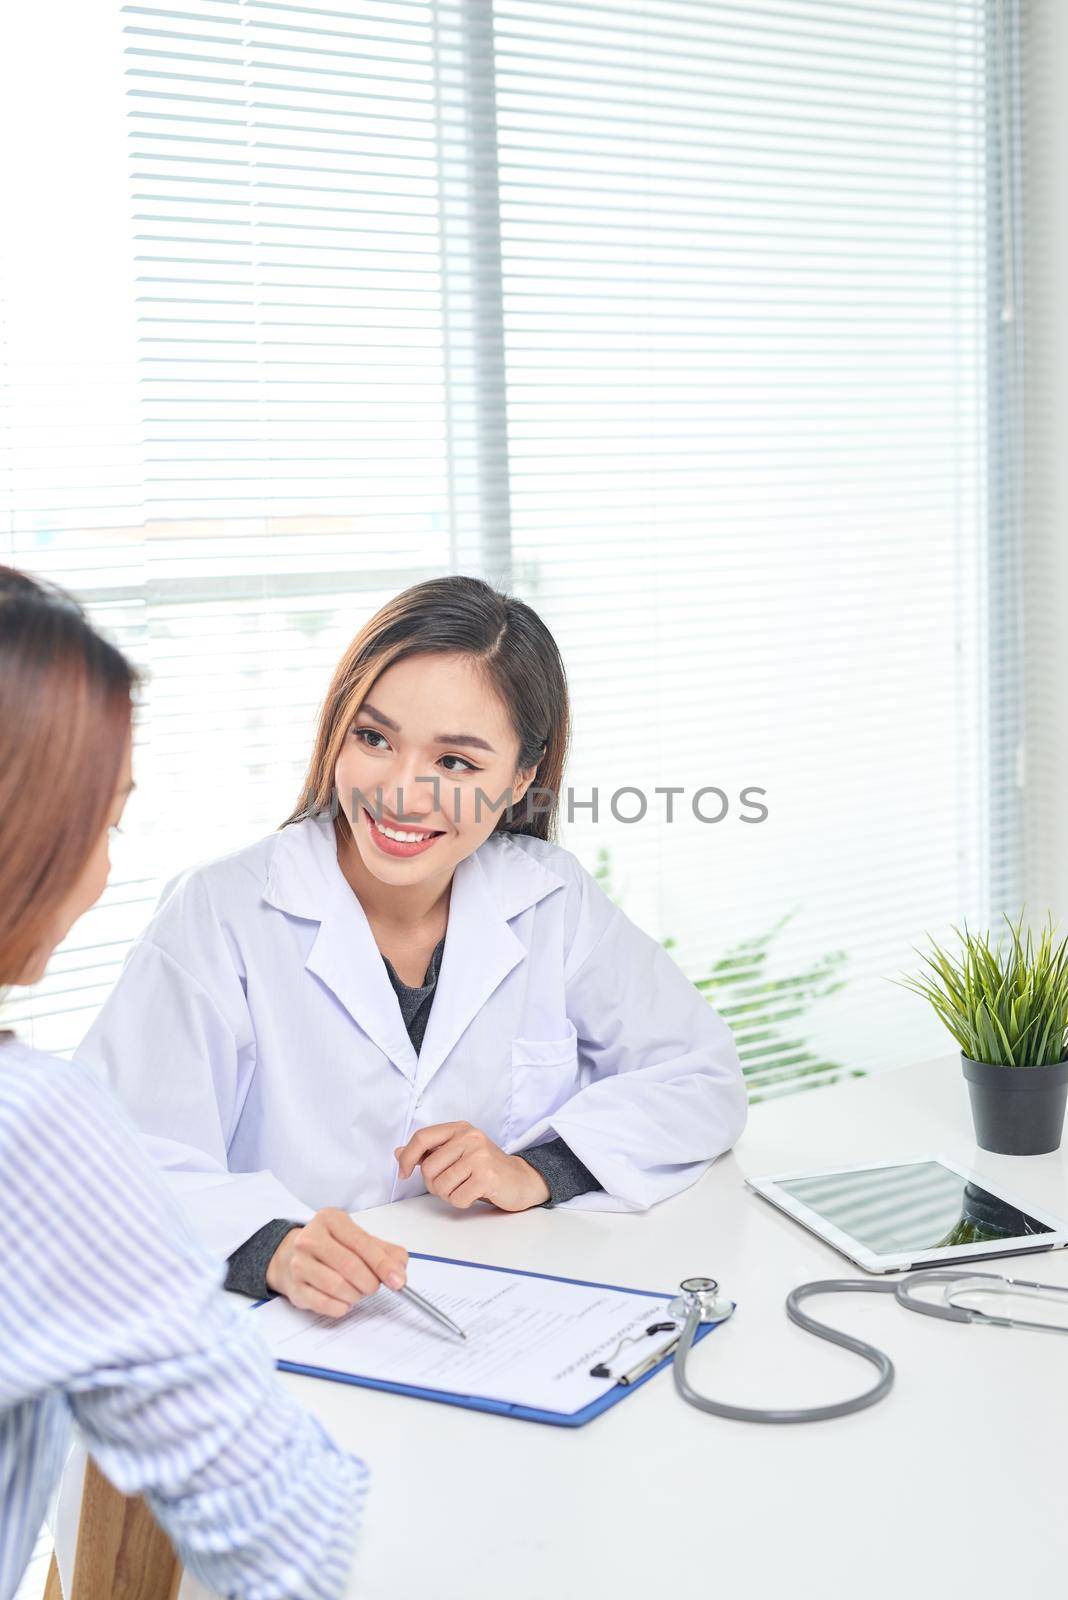 Female doctor talks to female patient in hospital office while writing on the patients health record on the table. Healthcare and medical service.  by makidotvn